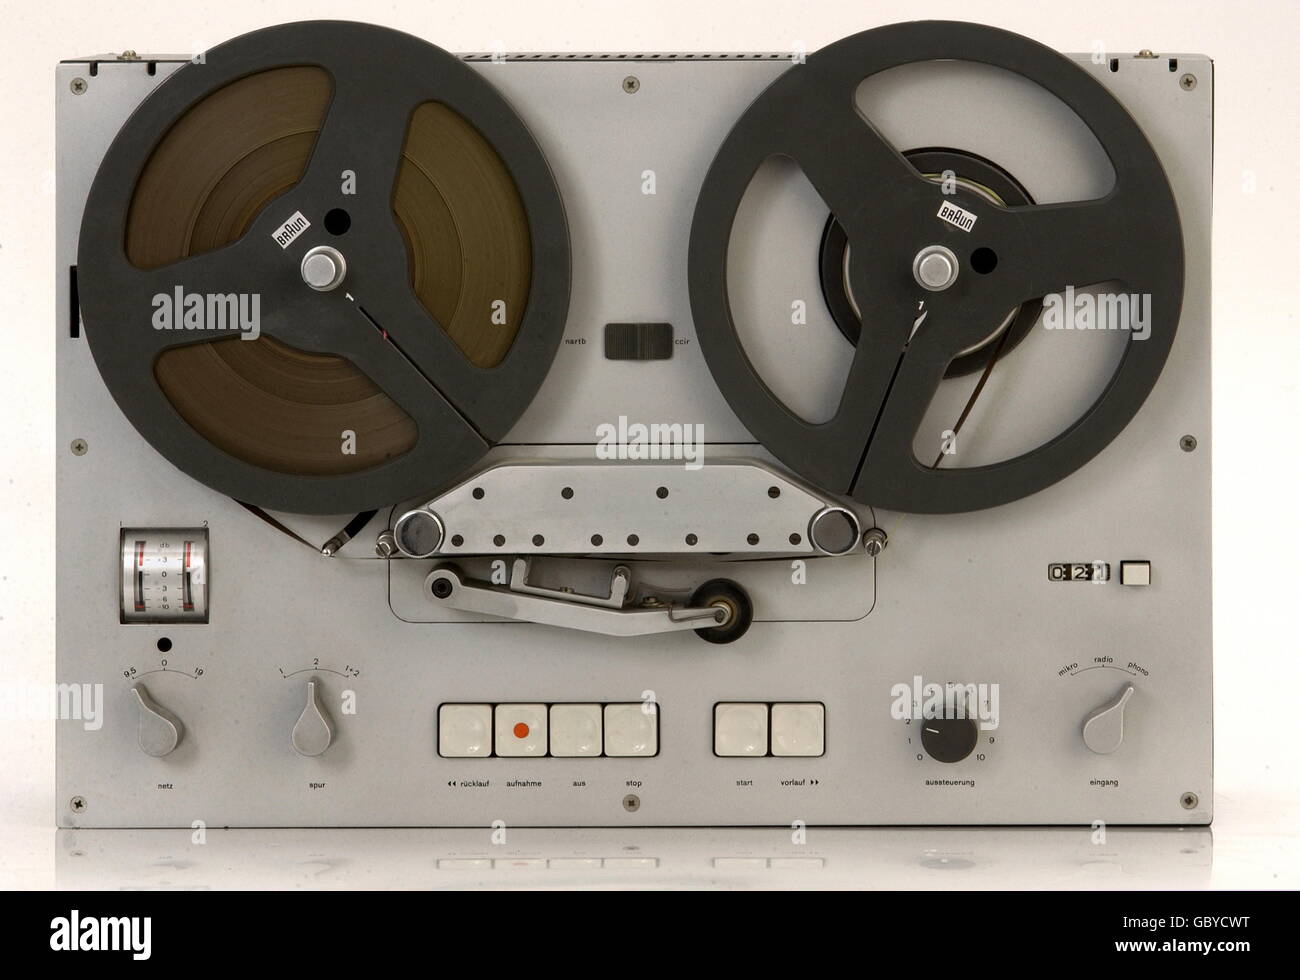 technics, tape recorders, tape recorder Braun TG 60, stereo, loaded with transistors, 1964, 1960s, 60s, 20th century, historic, historical, studio shot, two tape speeds: 9,5 cm/sec. and 19 cm/sec., switchable, three separated magnetic heads, full automatic push button control for mono and stereo recording and play, audio tape counter, sheet steel chassis, weight: 19,2 kg, original price: DM 1980,-, Additional-Rights-Clearences-Not Available Stock Photo